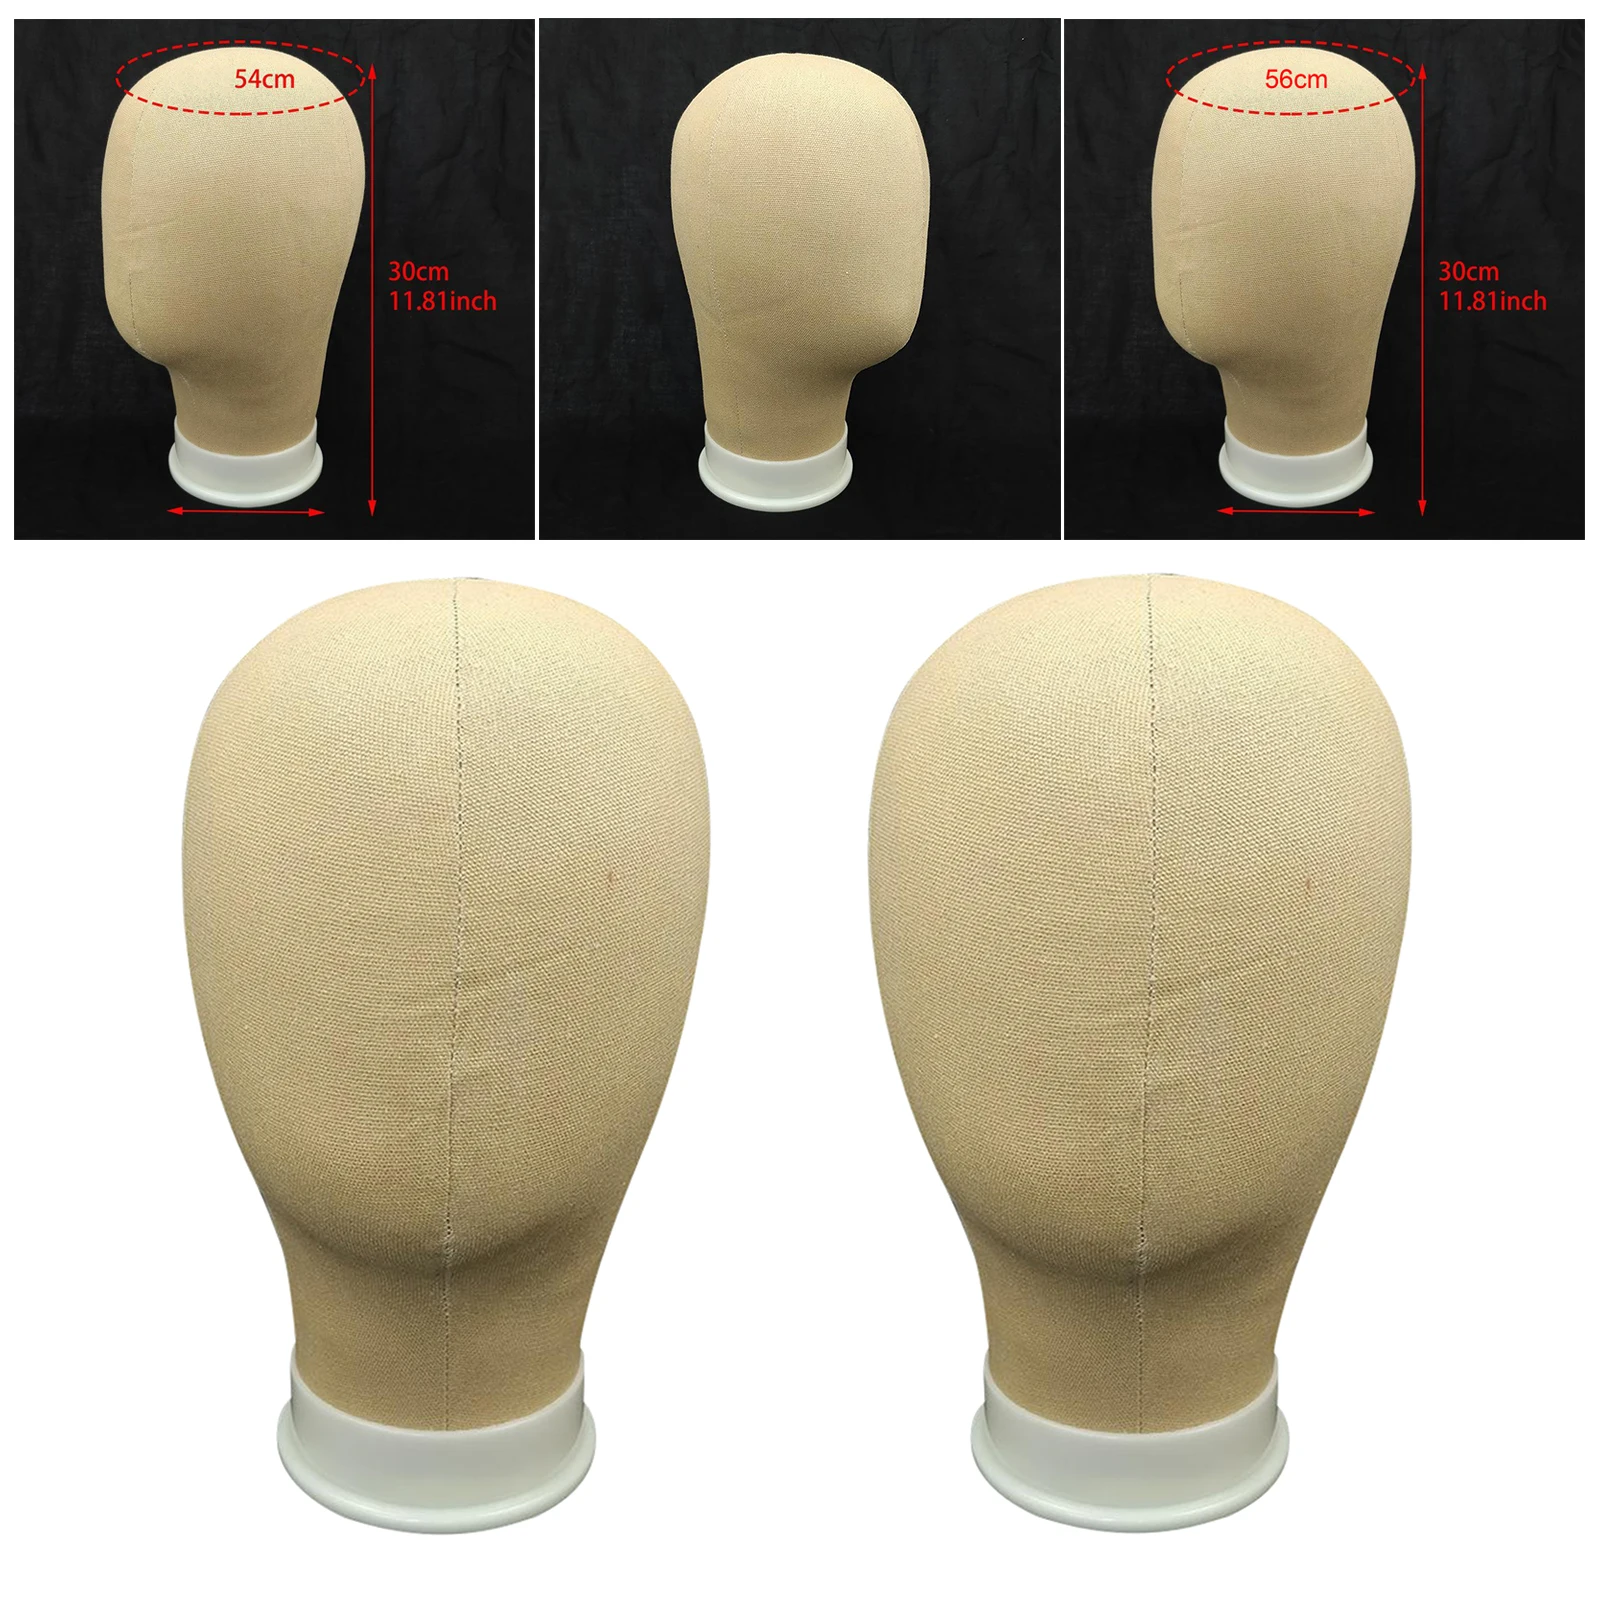 Canvas Block Head for Wig Making Mannequin head Hats Wigs Head Decorations Displaying Styling Manikin Wig Stand Holder 